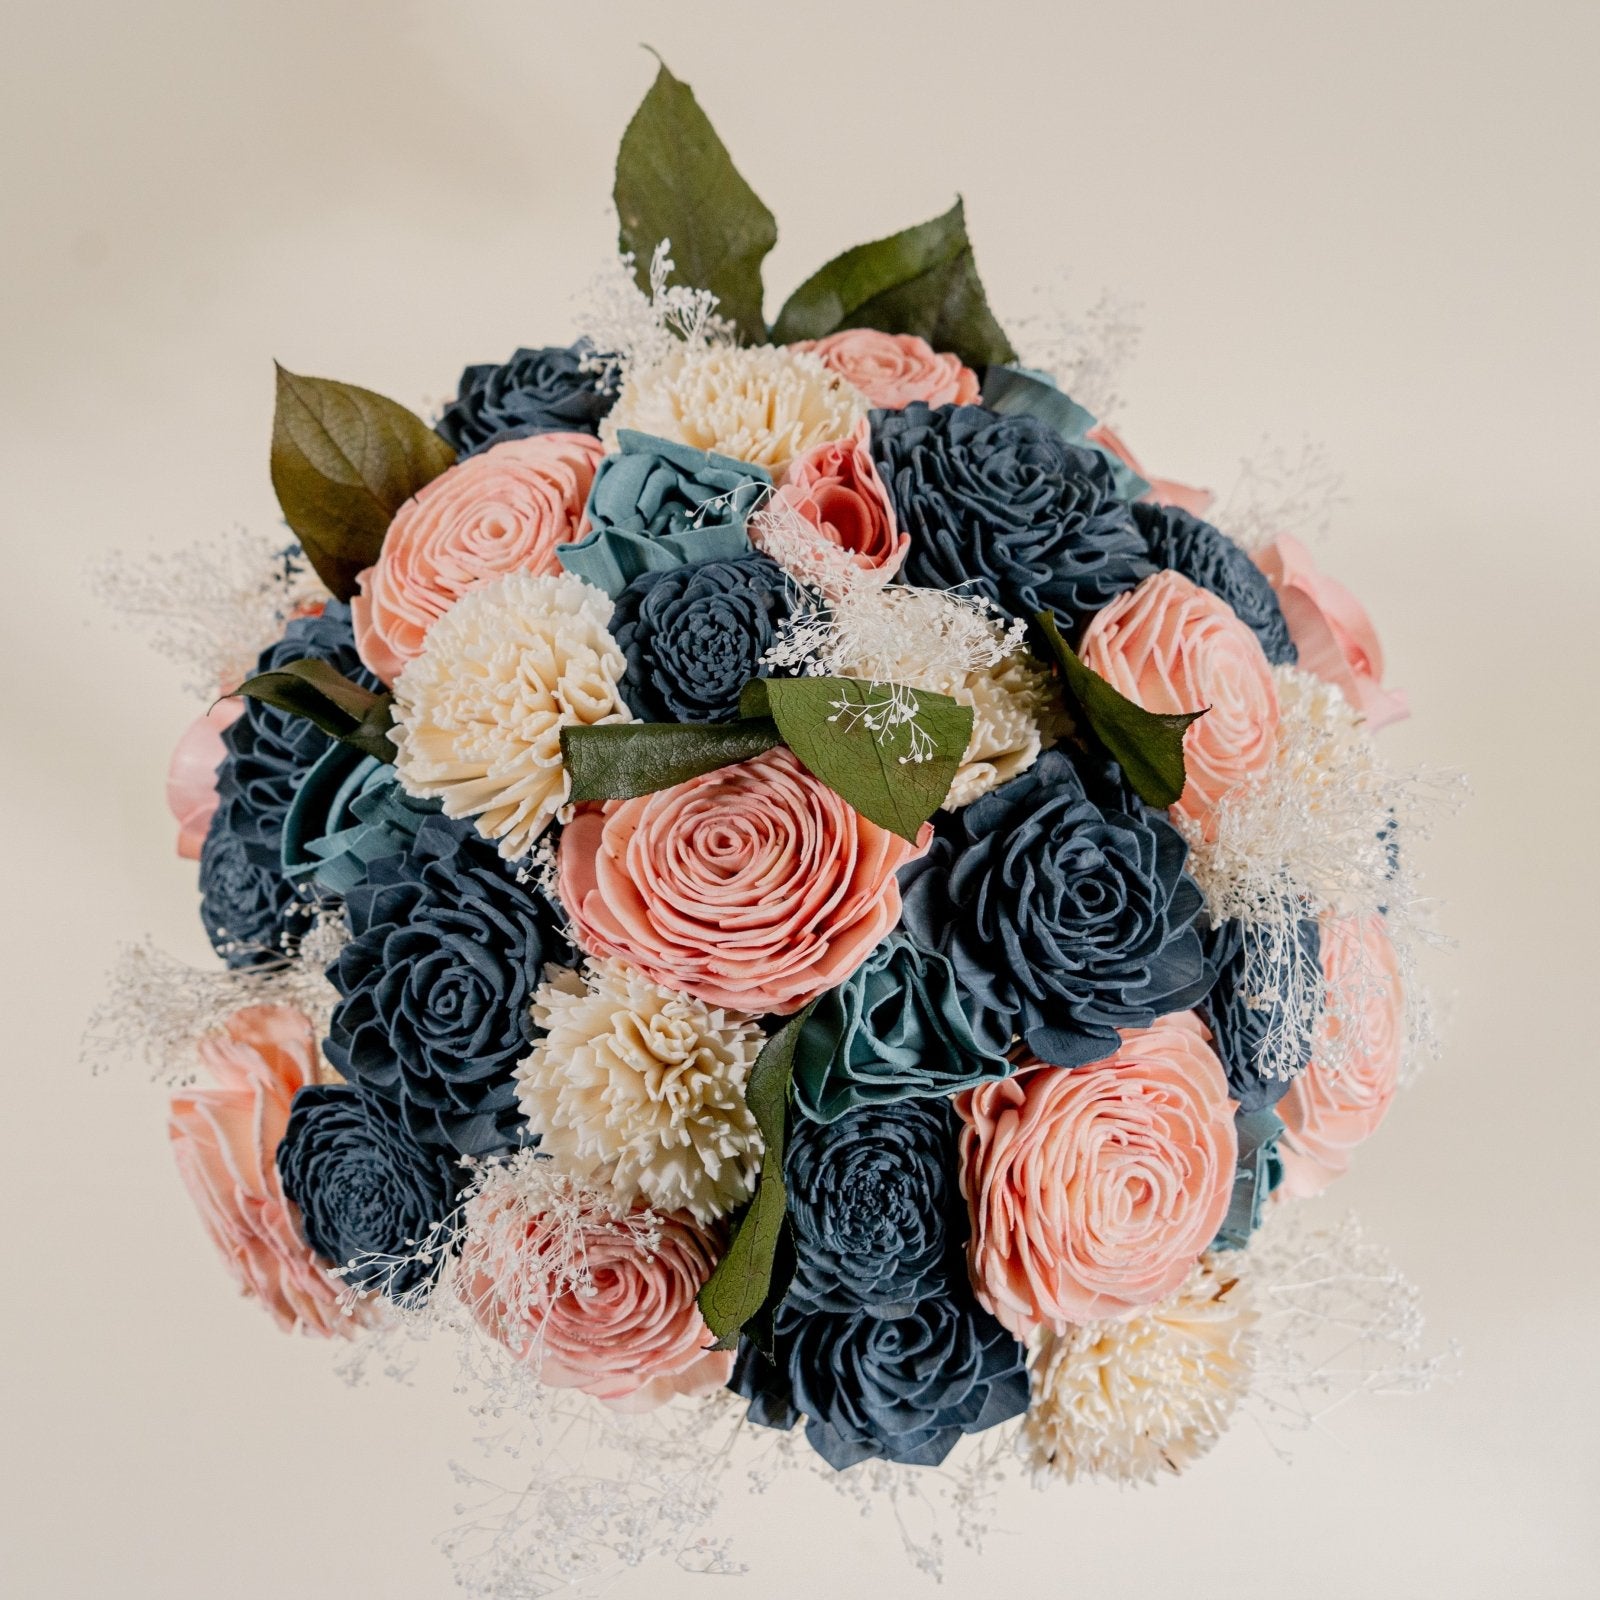 Youre Dreamy Peach Collection DIY Wood Flower Bouquet Kit Peach, Sapphire  Blue, and Ivory Sola Wood Flower Bouquet 